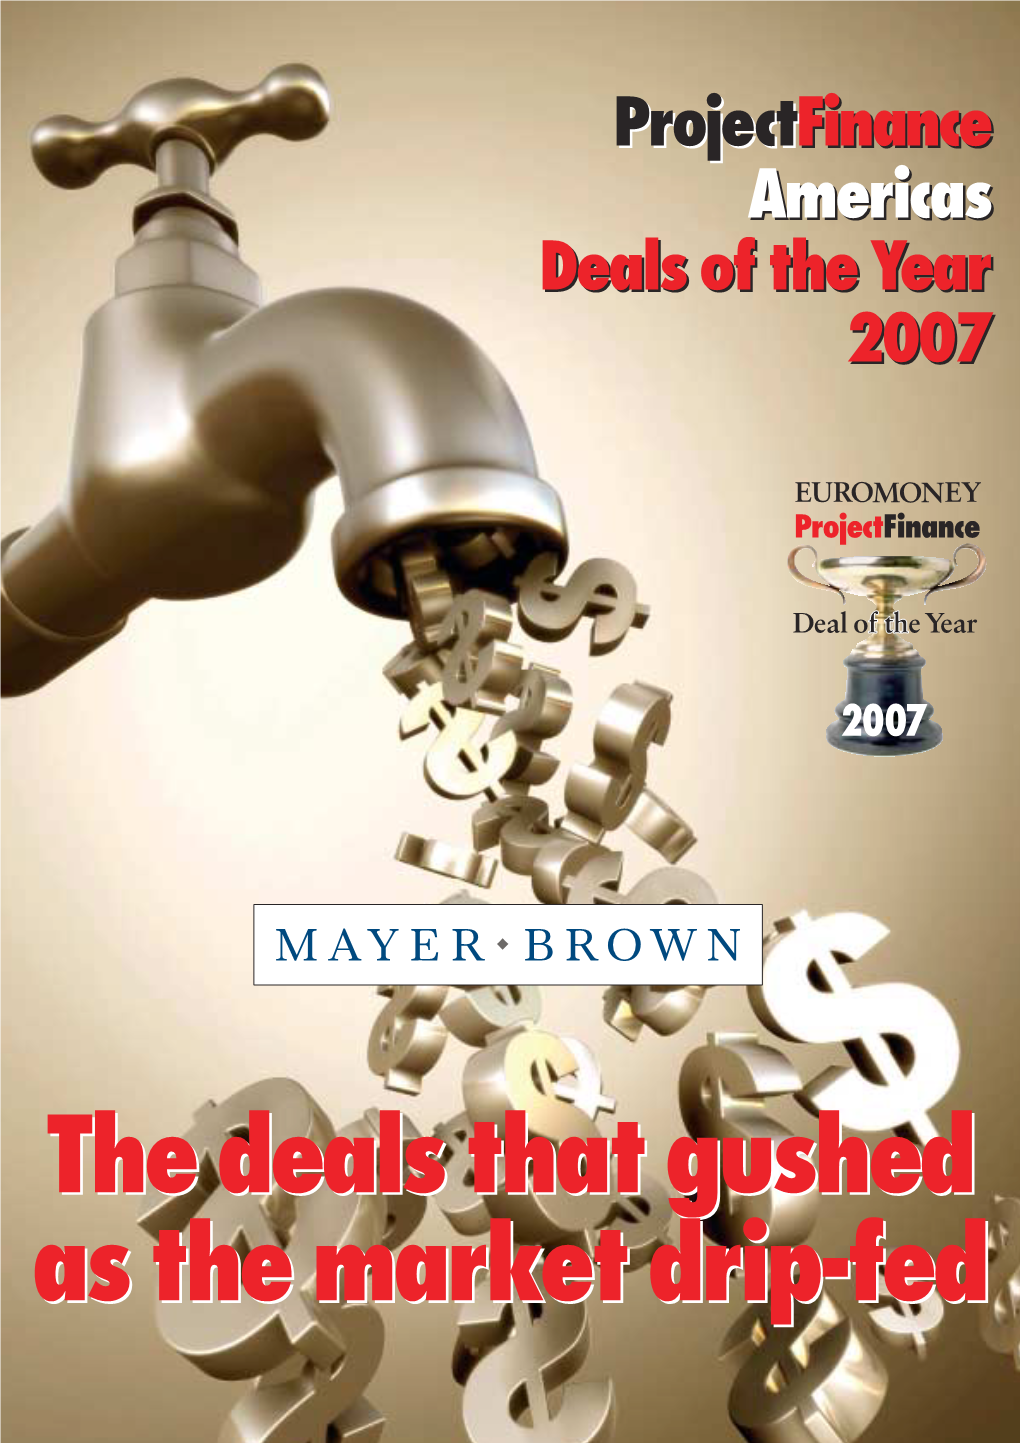 Americas Deals of the Year 2007 Projectfinance